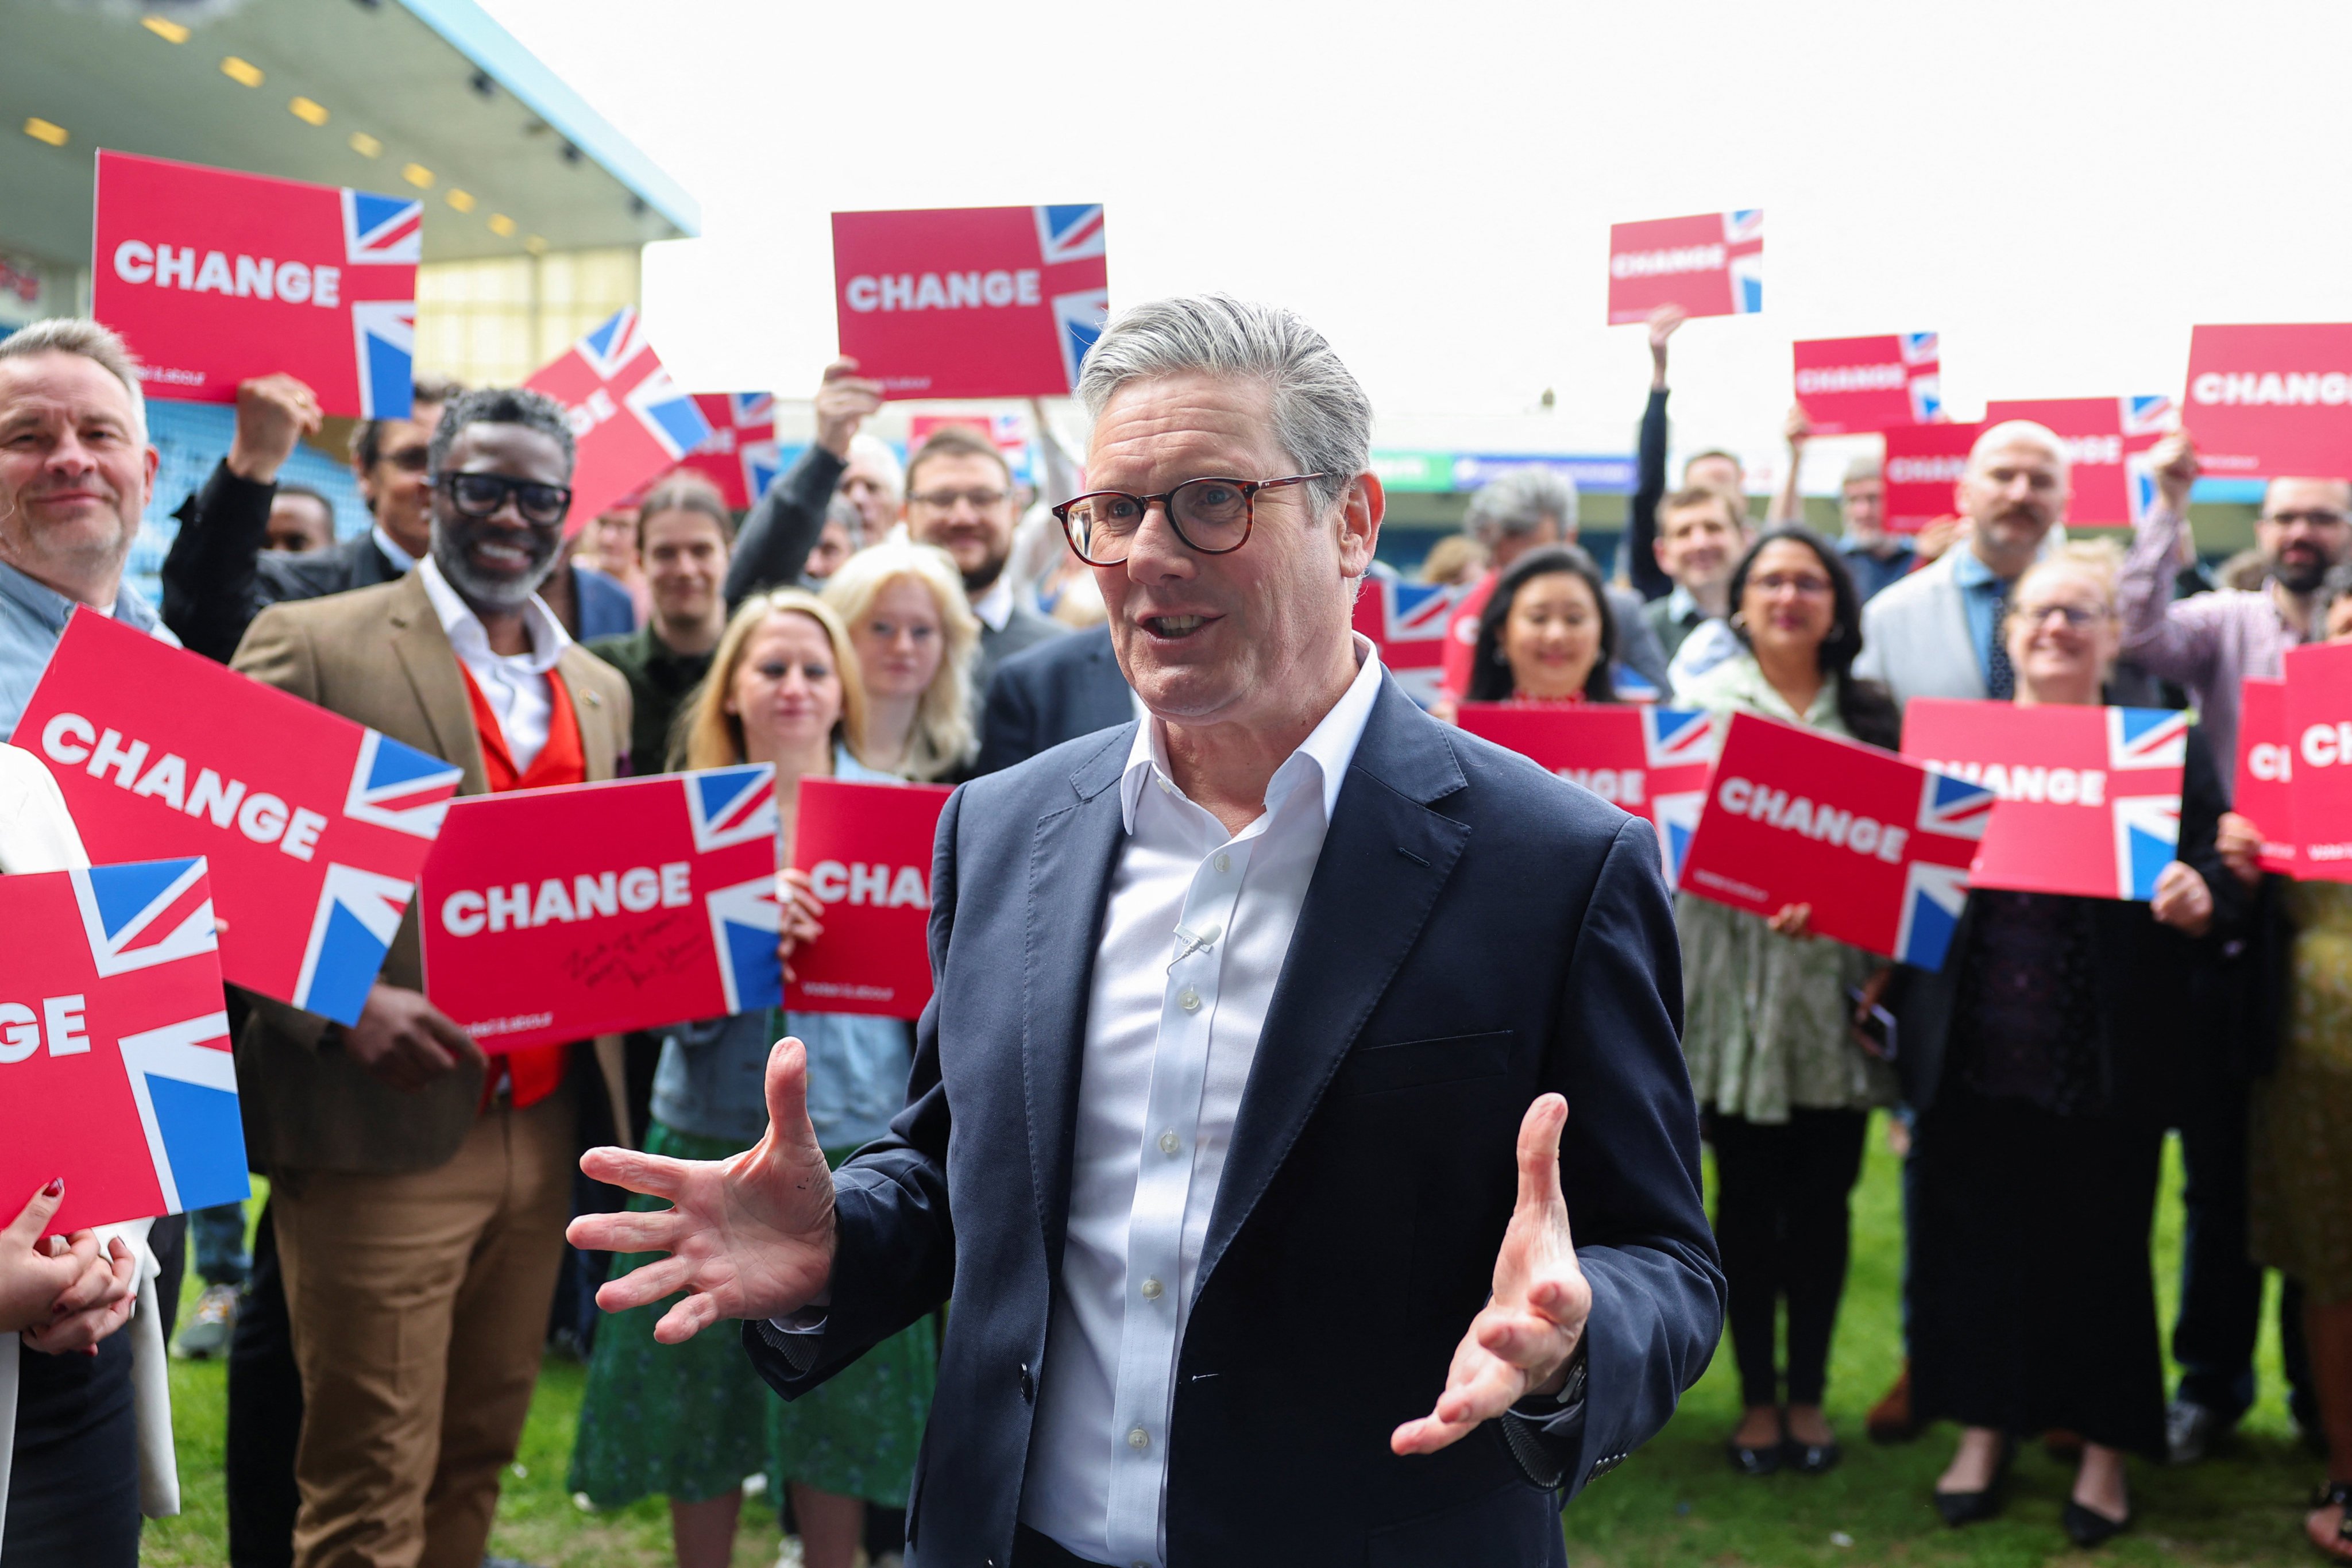 British opposition Labour Party leader Keir Starmer at an election campaign event on Thursday. Photo: Reuters